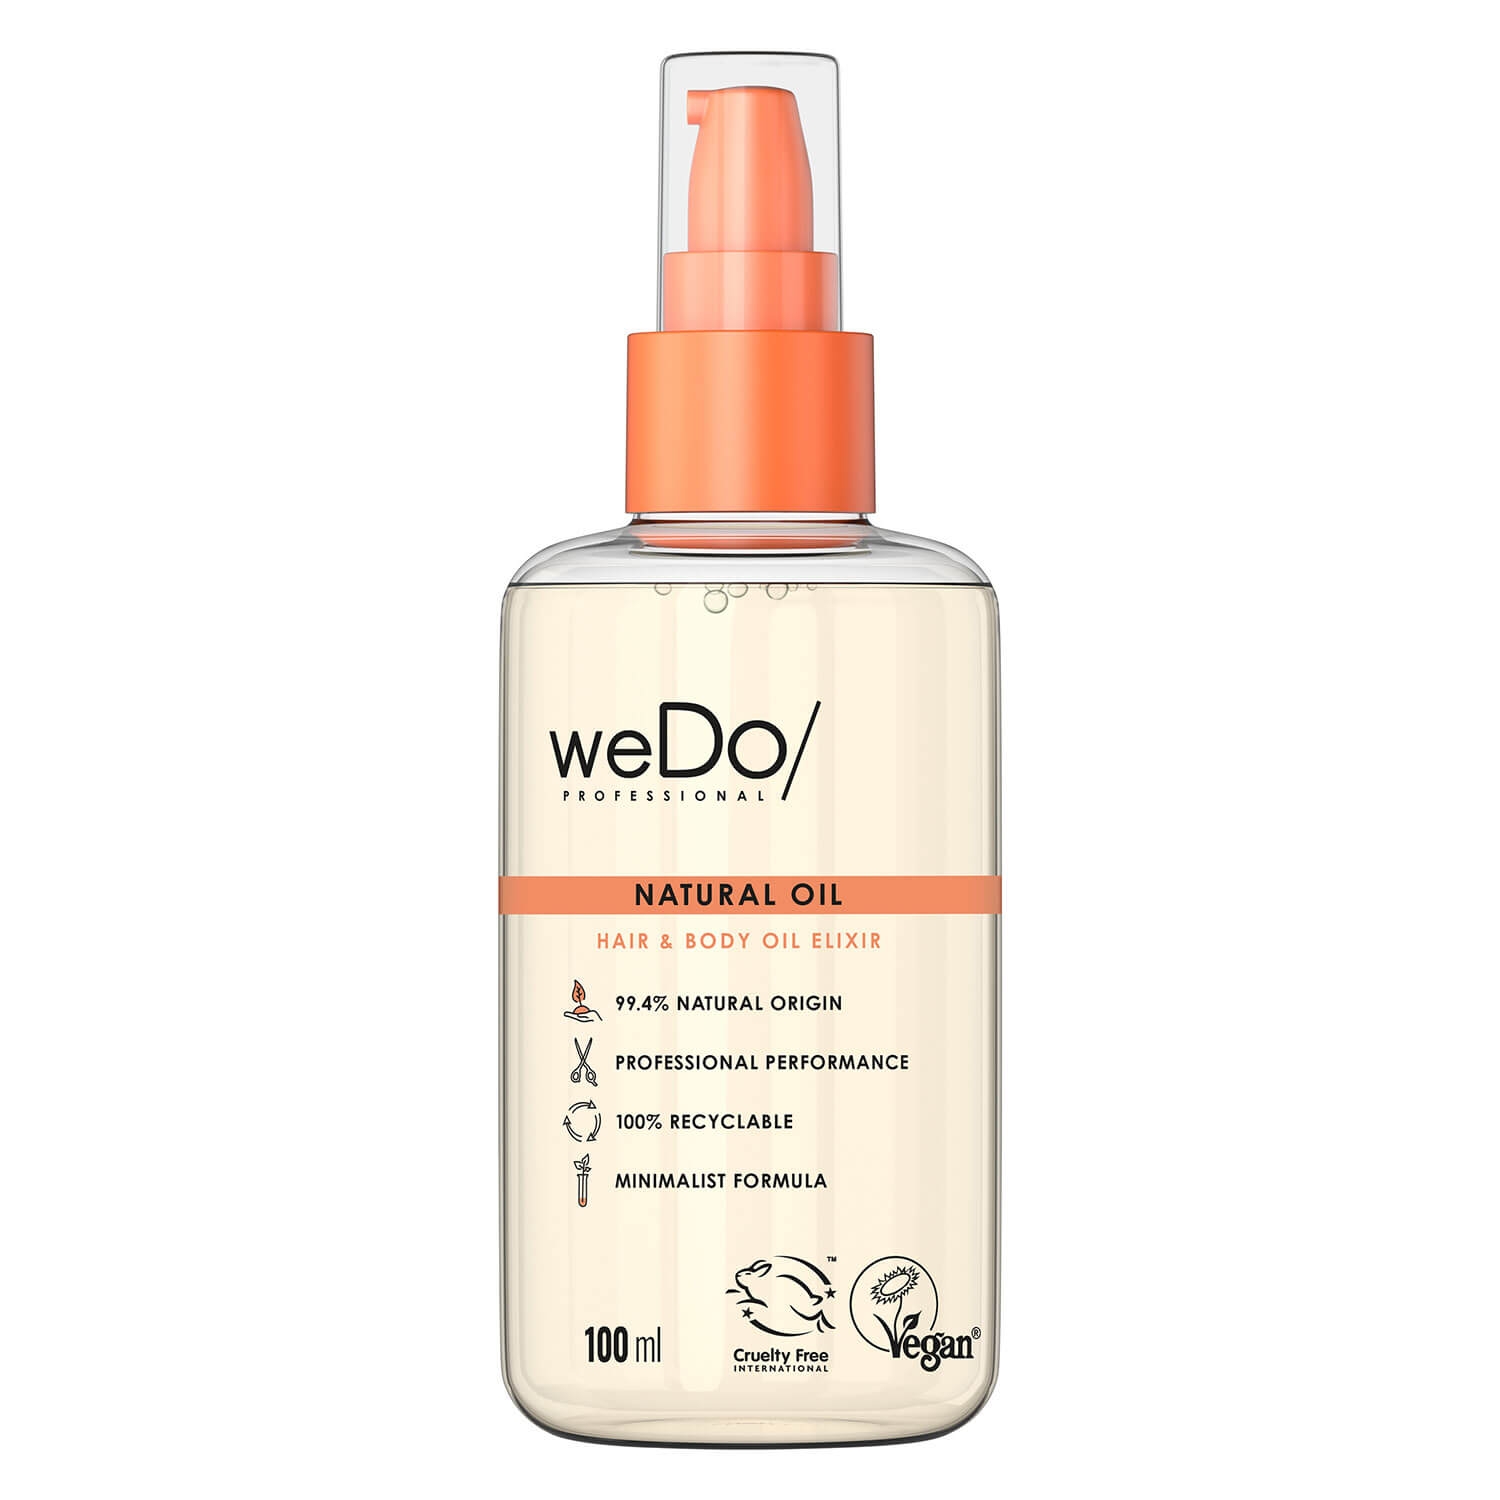 Product image from weDo/ - Natural Oil